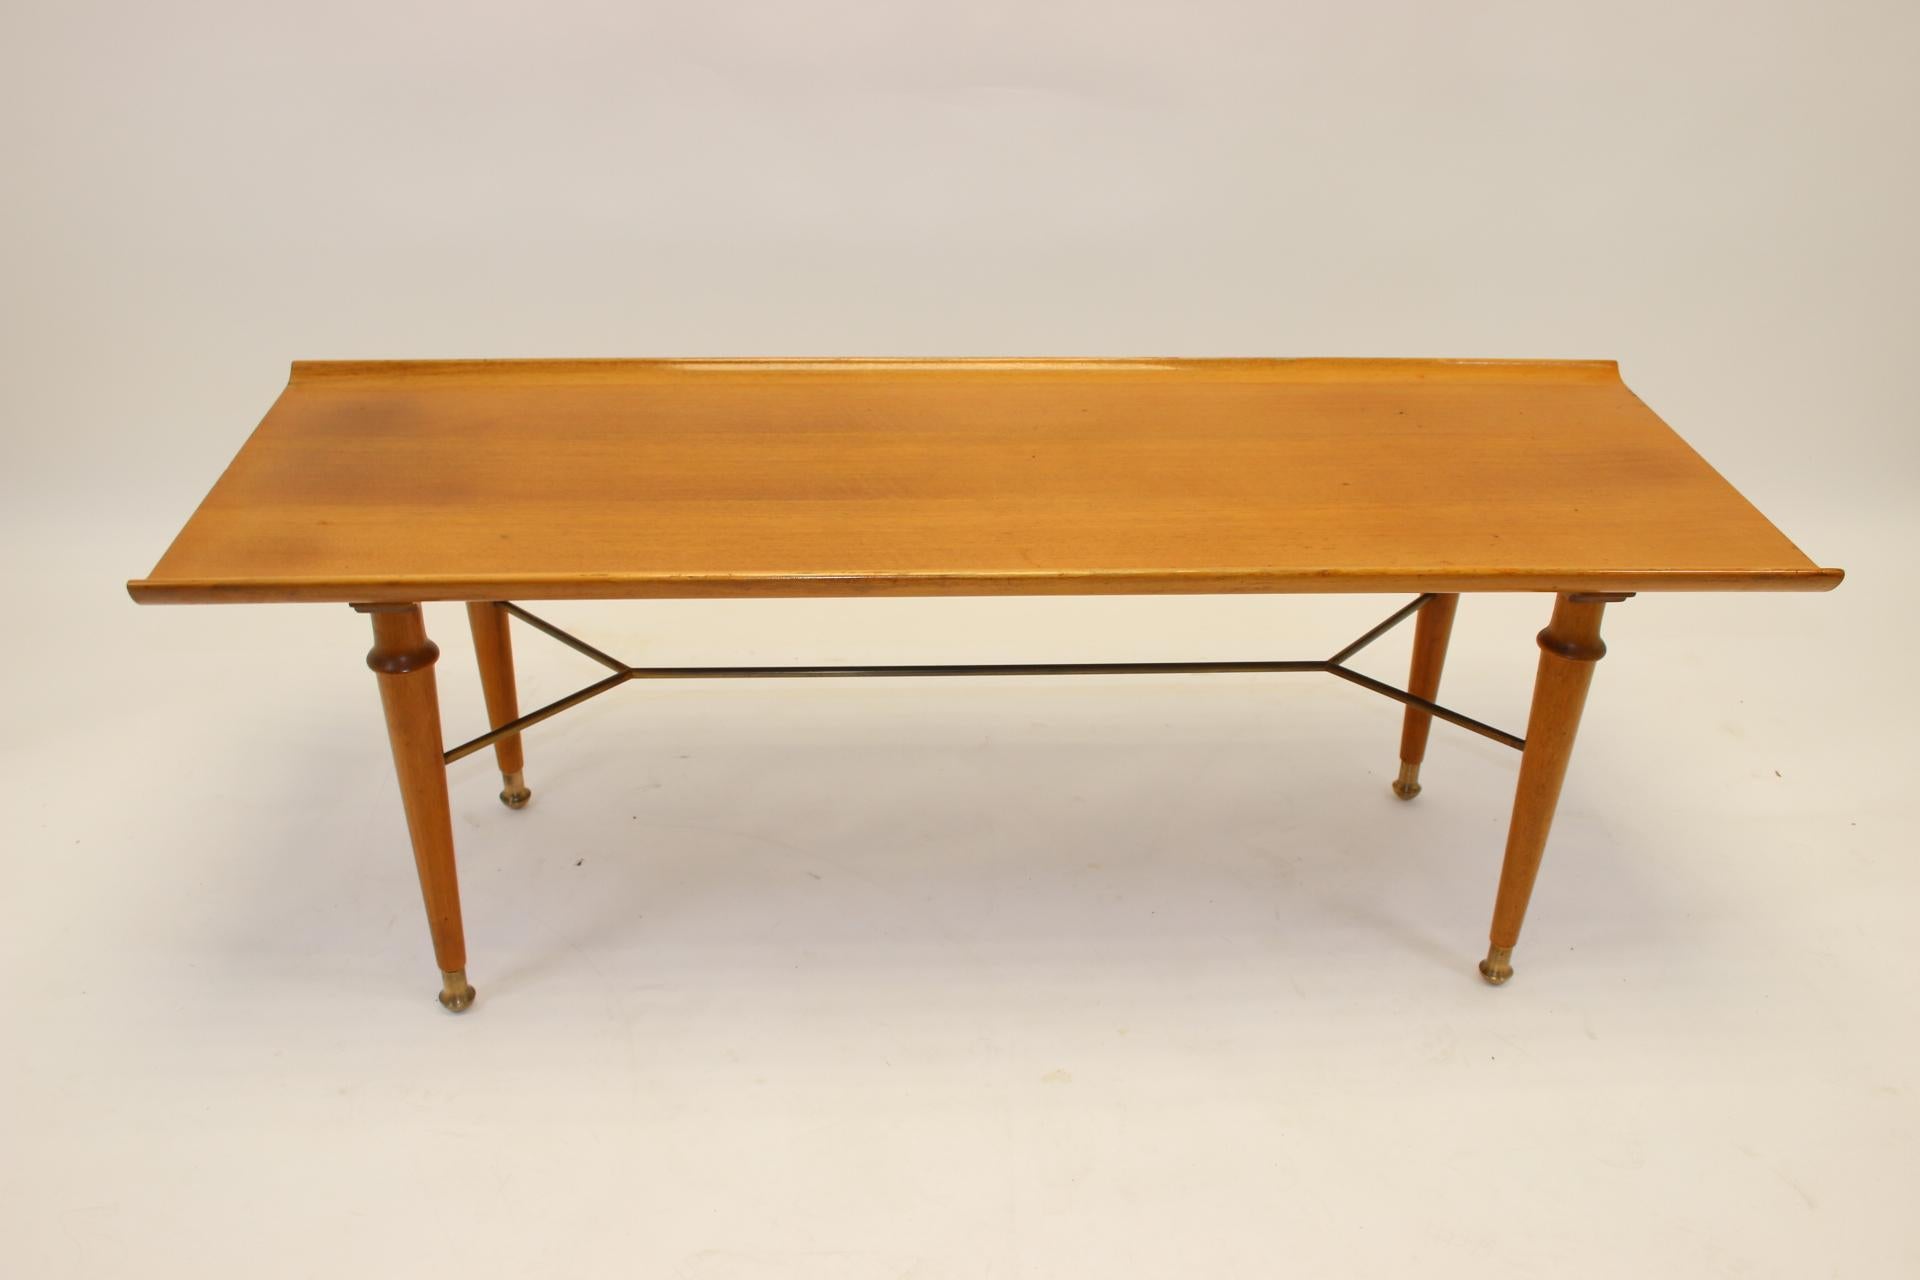 Scandinavian Modern Coffee Table with Y-Frame by A.A. Patijn for Zijlstra Joure